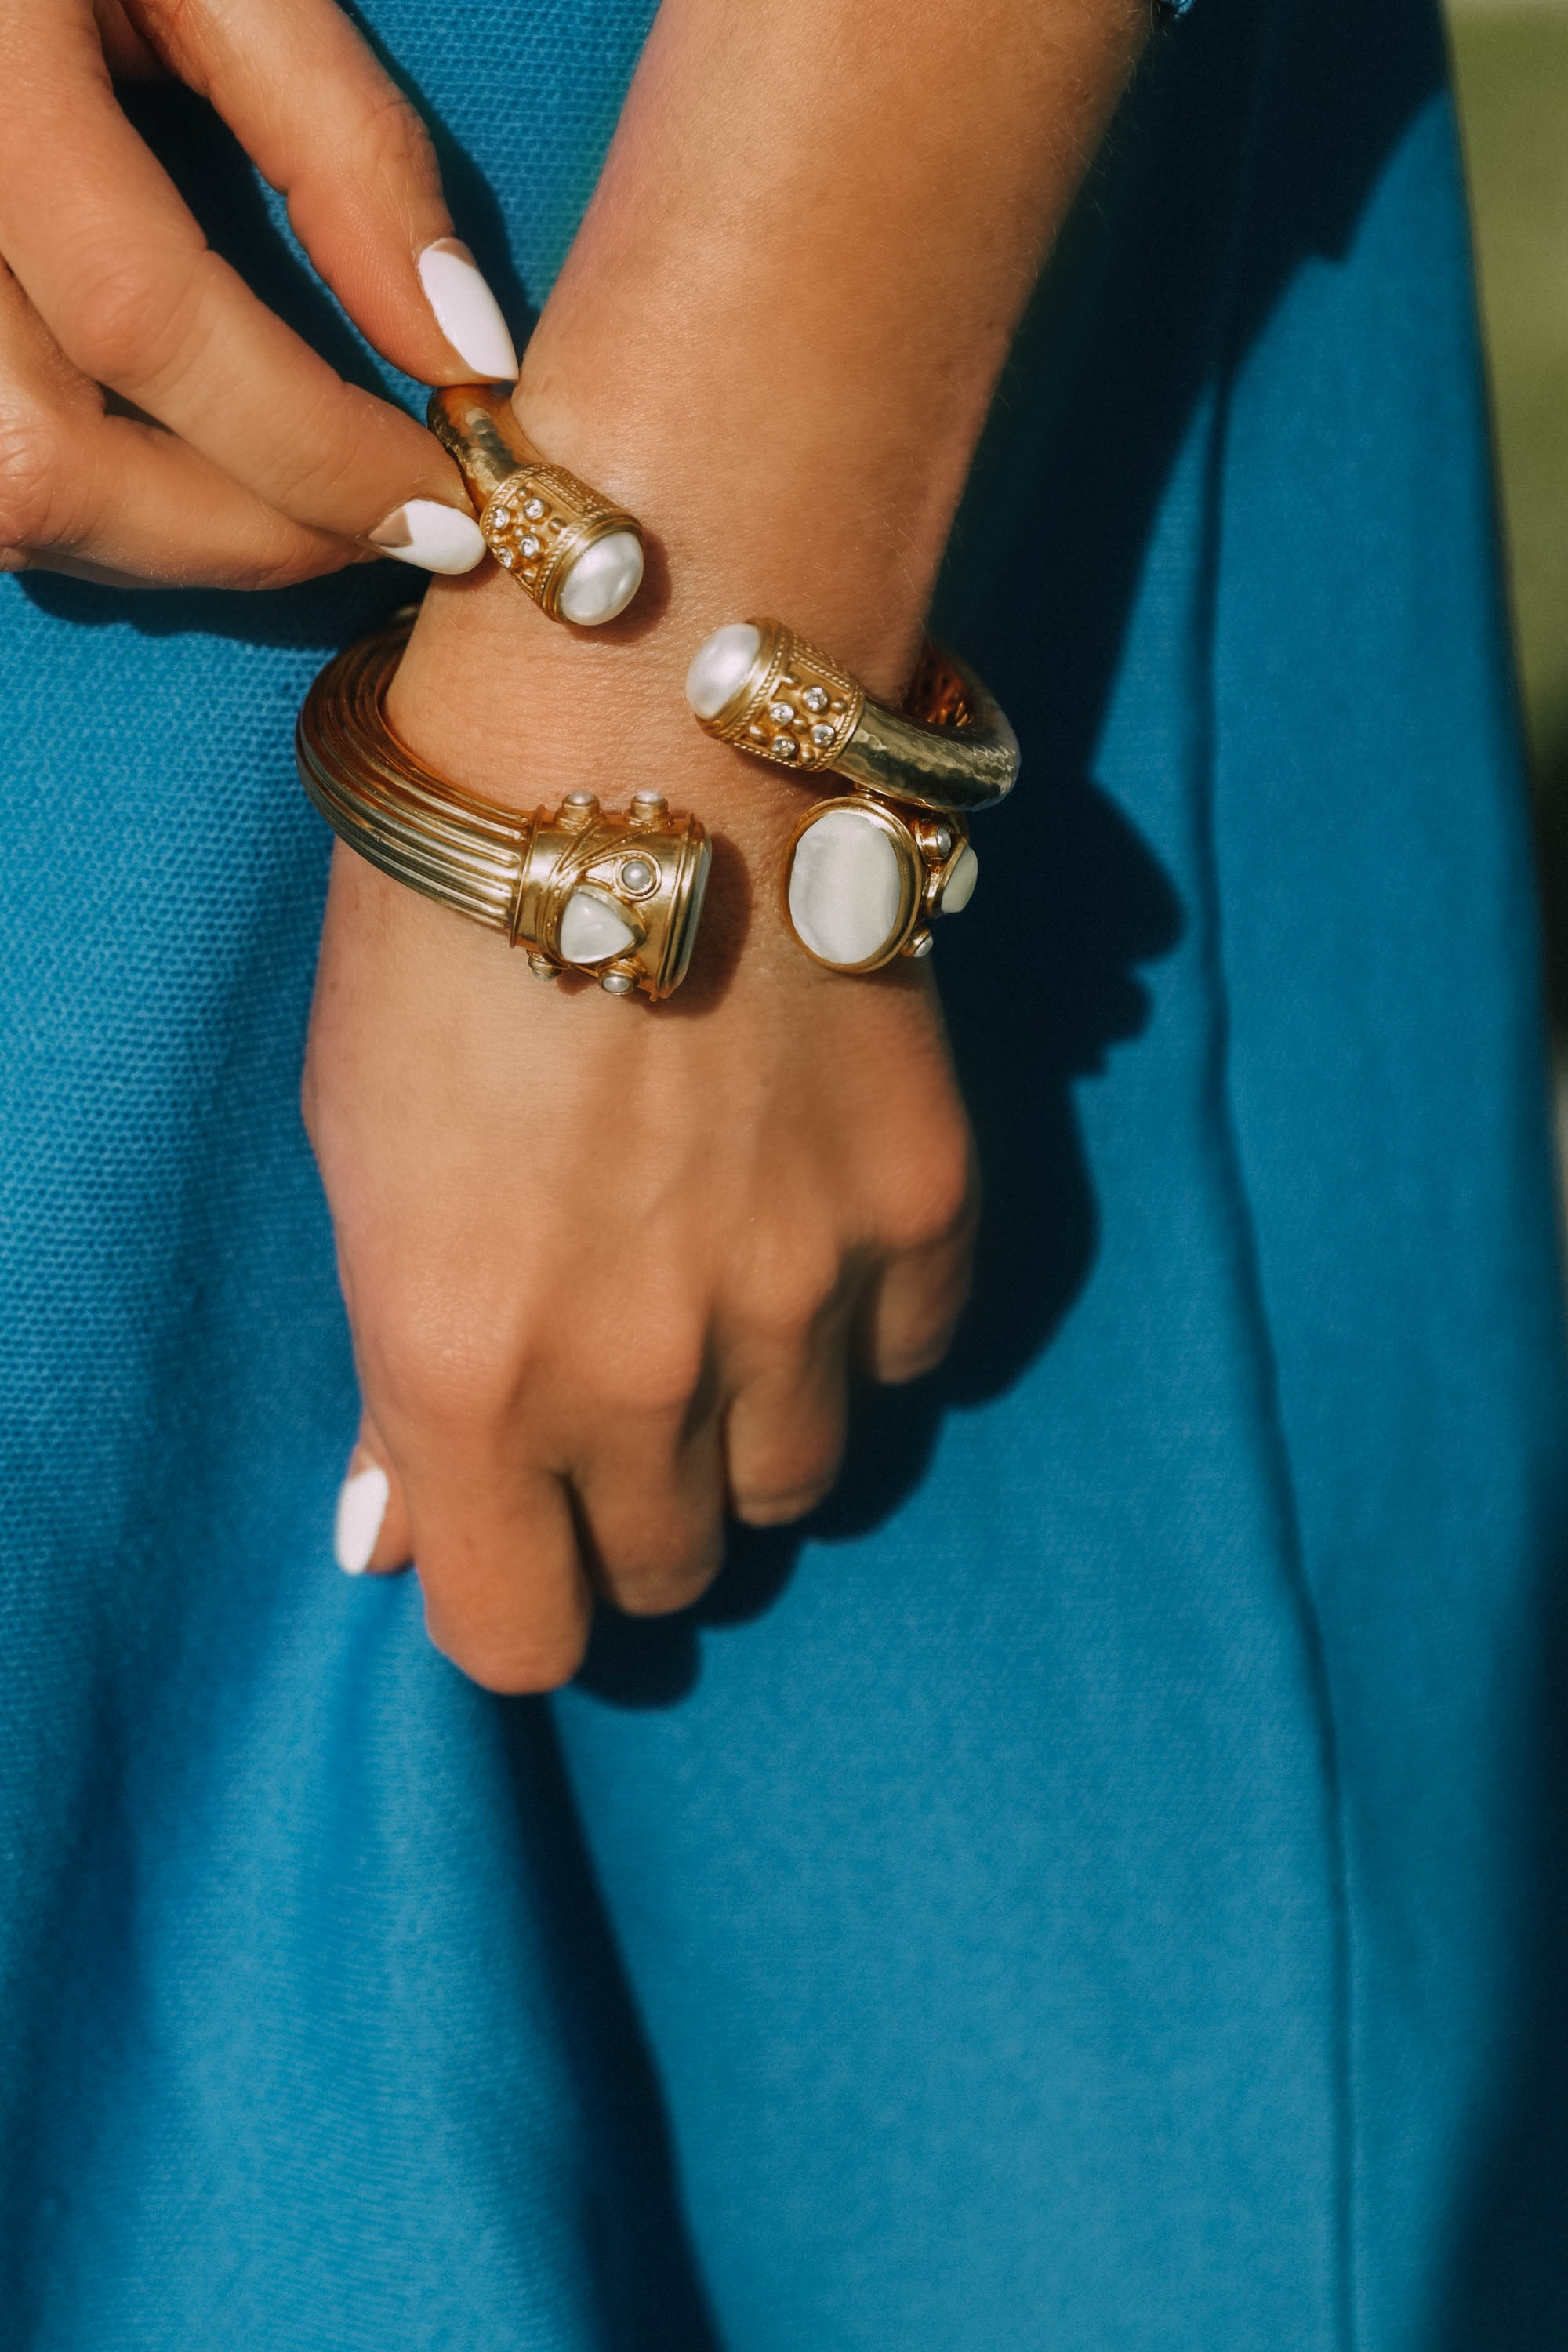 Basic Jewelry every women should own, Fashion blogger wearing Julie Vos cuff bracelets with white pearl